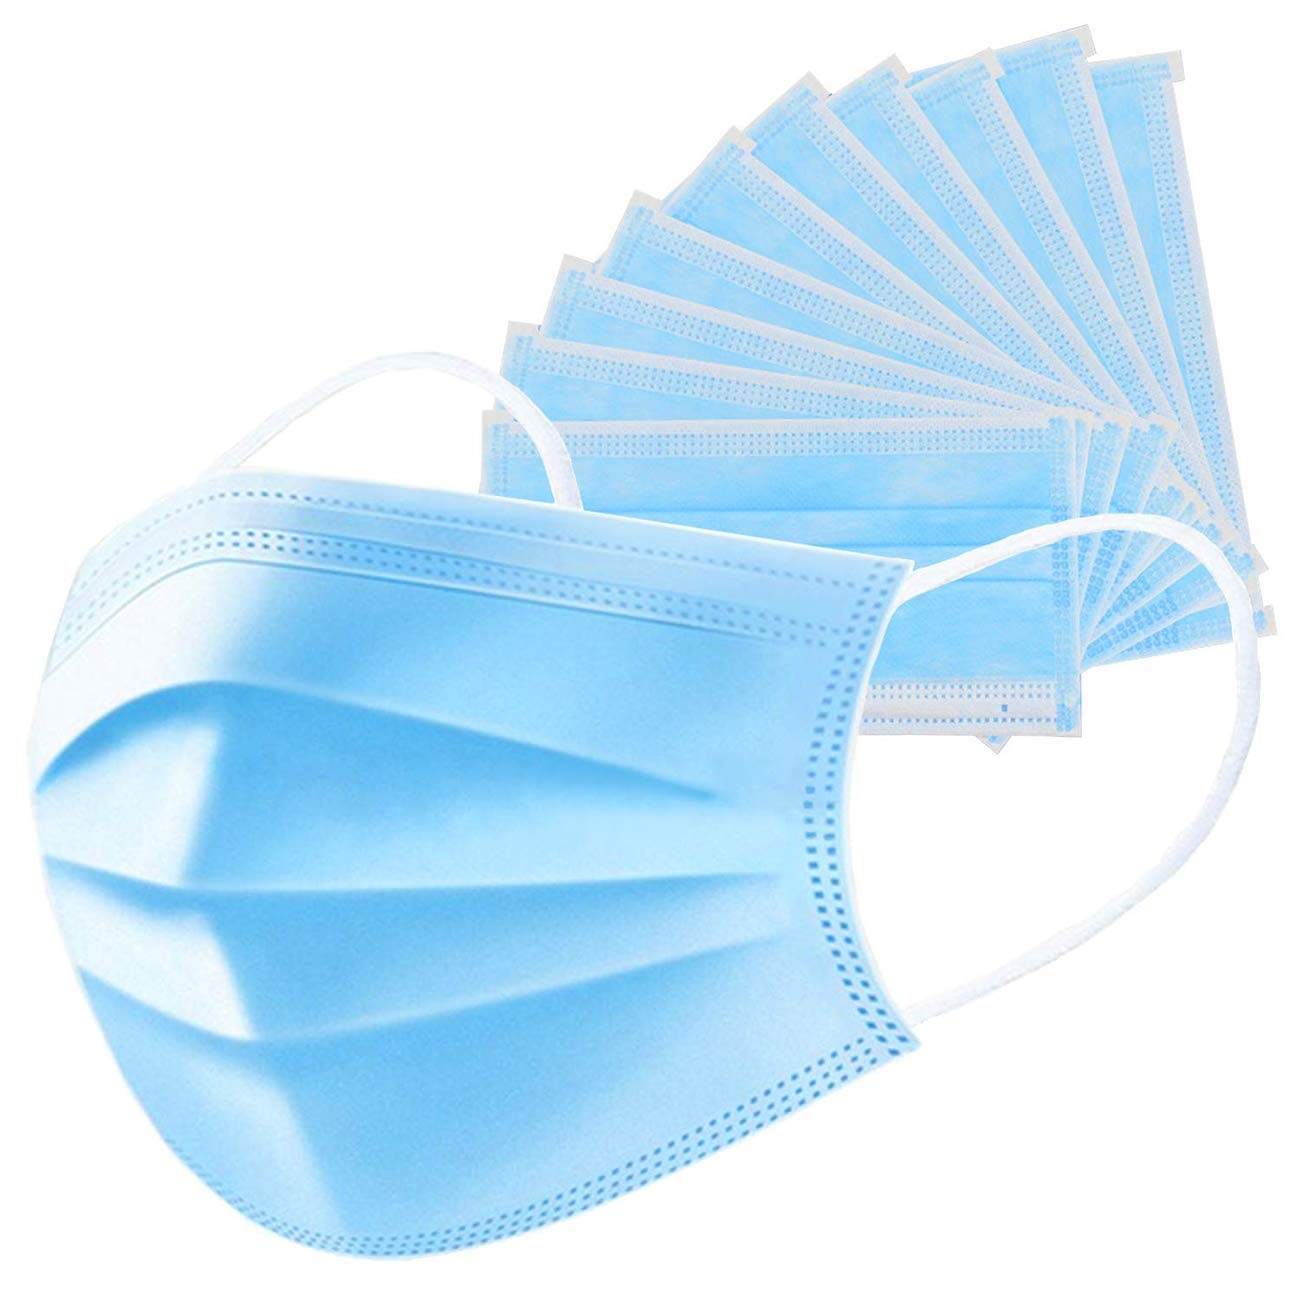 Pegasos Disposable Breathable 3 Ply Ear Loop Face Masks, 20-Pack - image 2 of 2